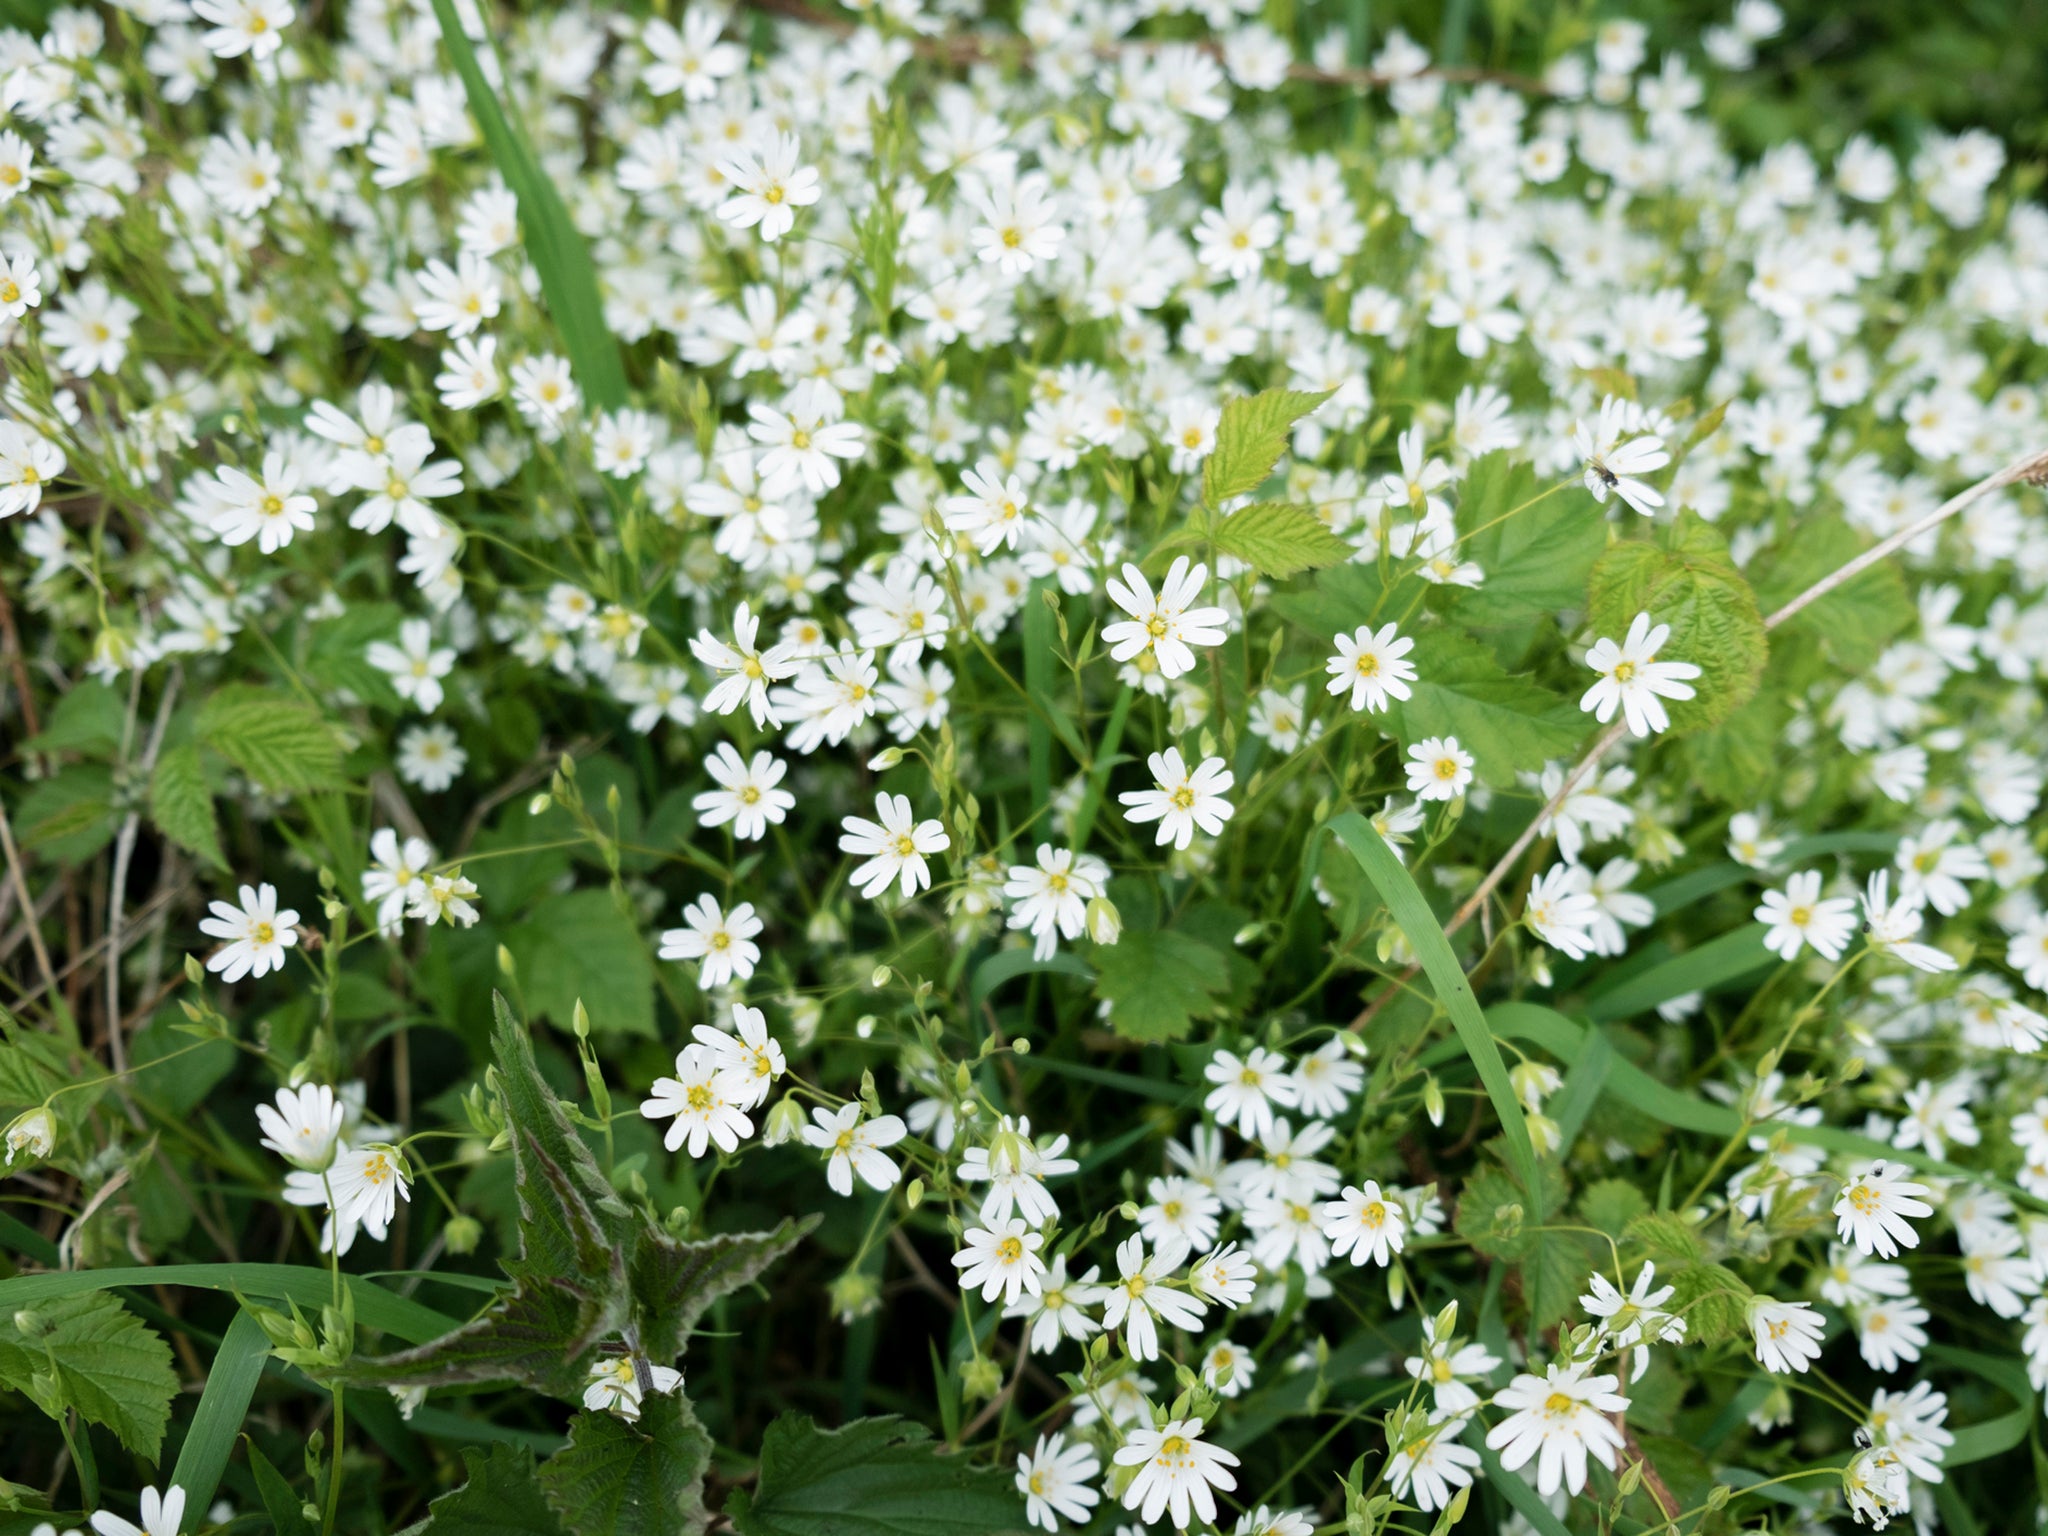 Chickweed can be seen all year round but is at its best in spring